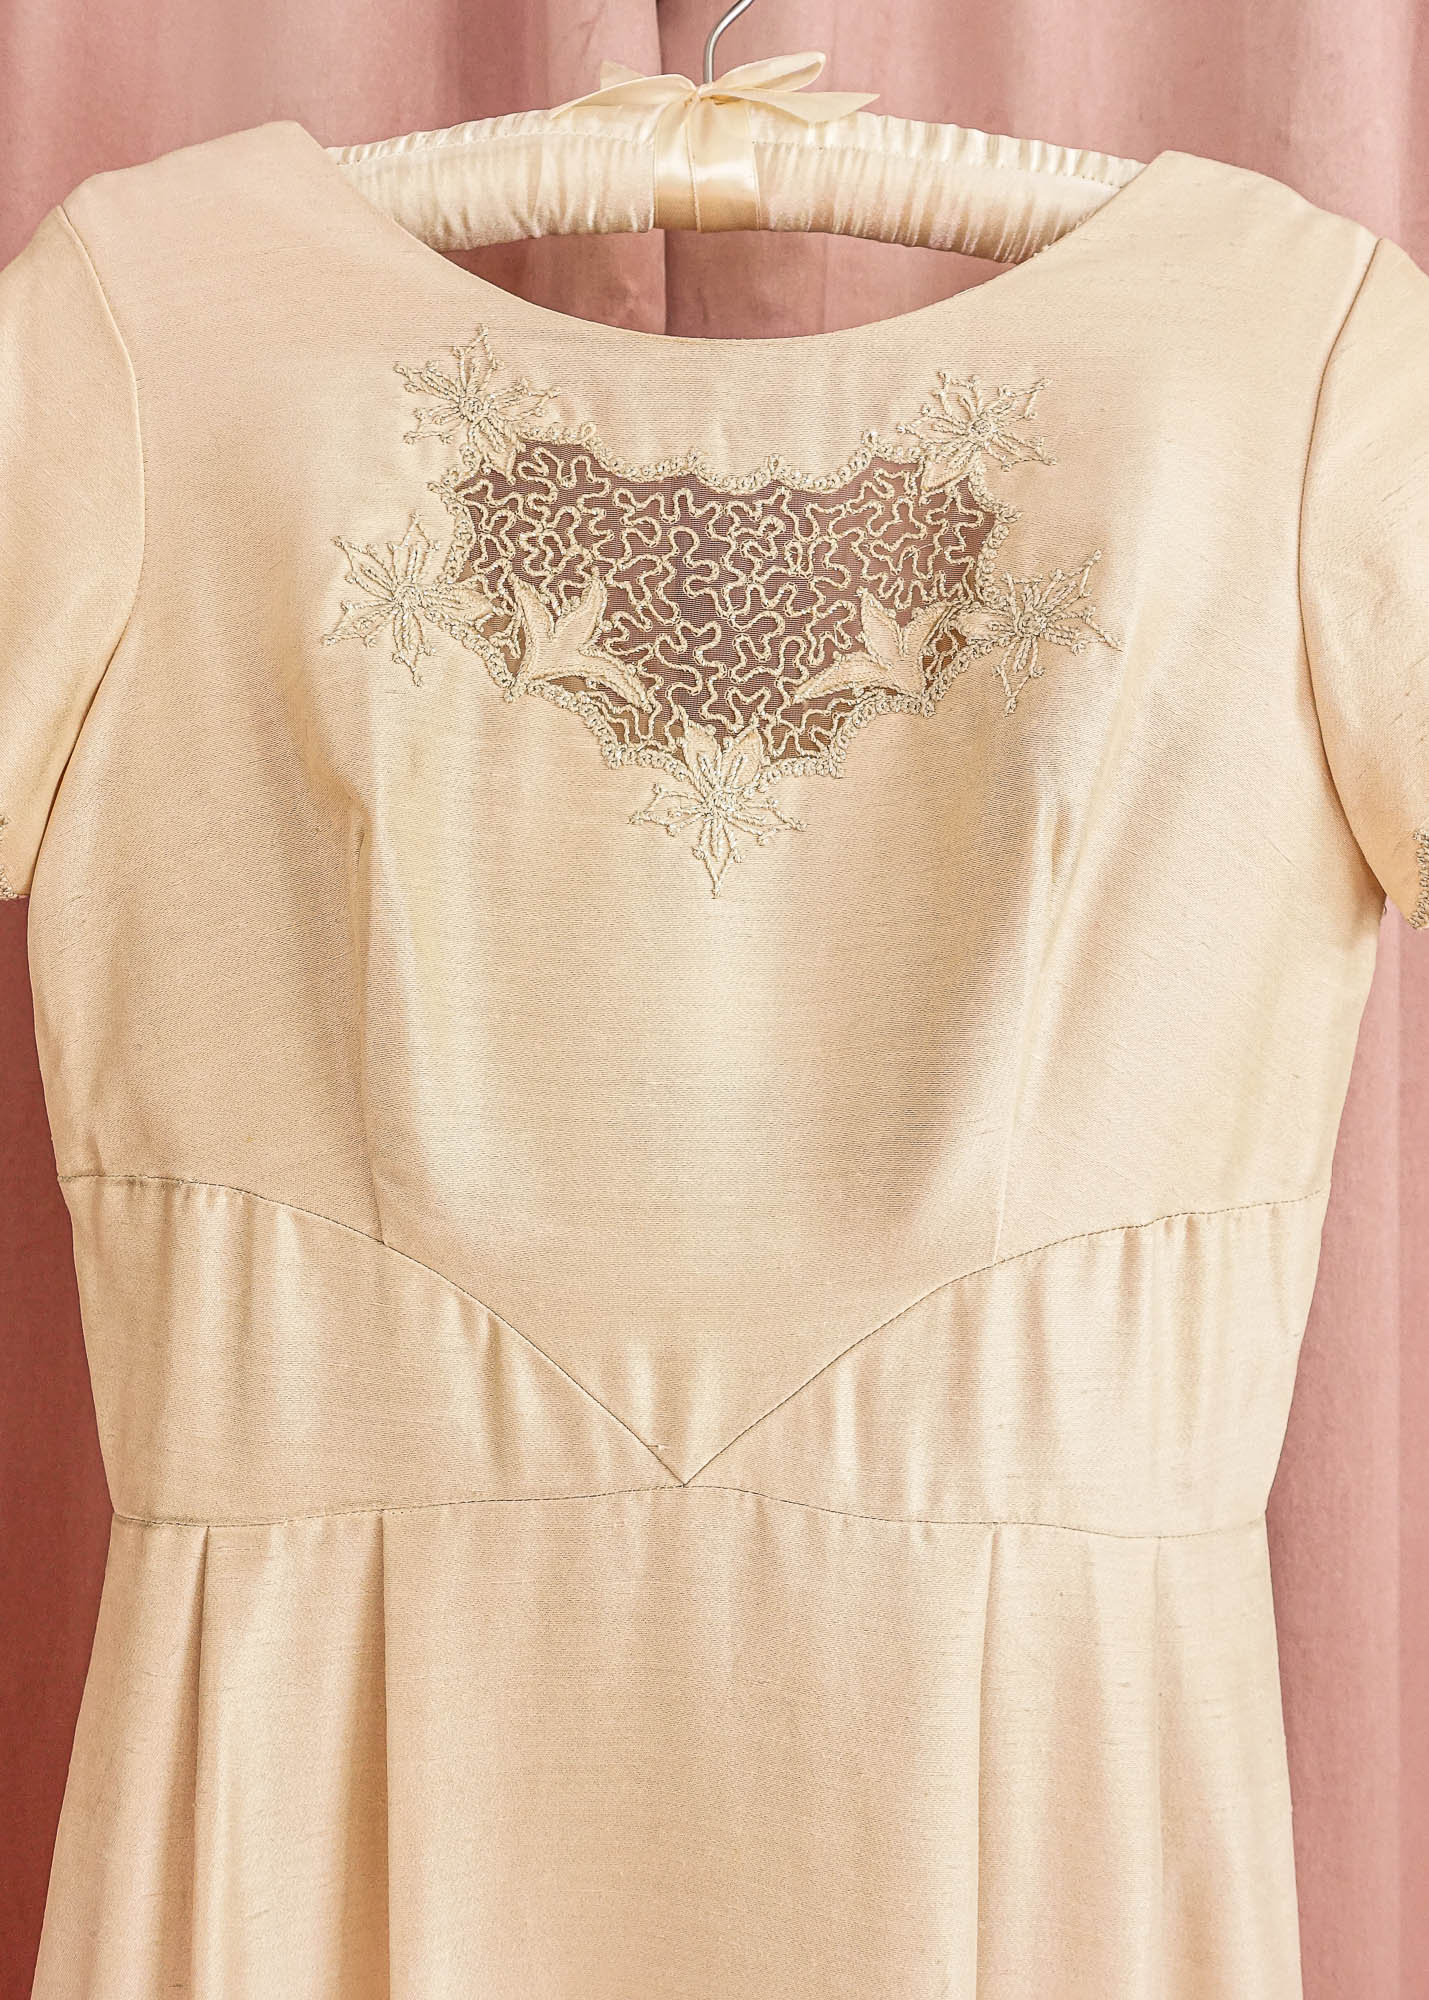 1960s Champagne Silk Cut Out Dress